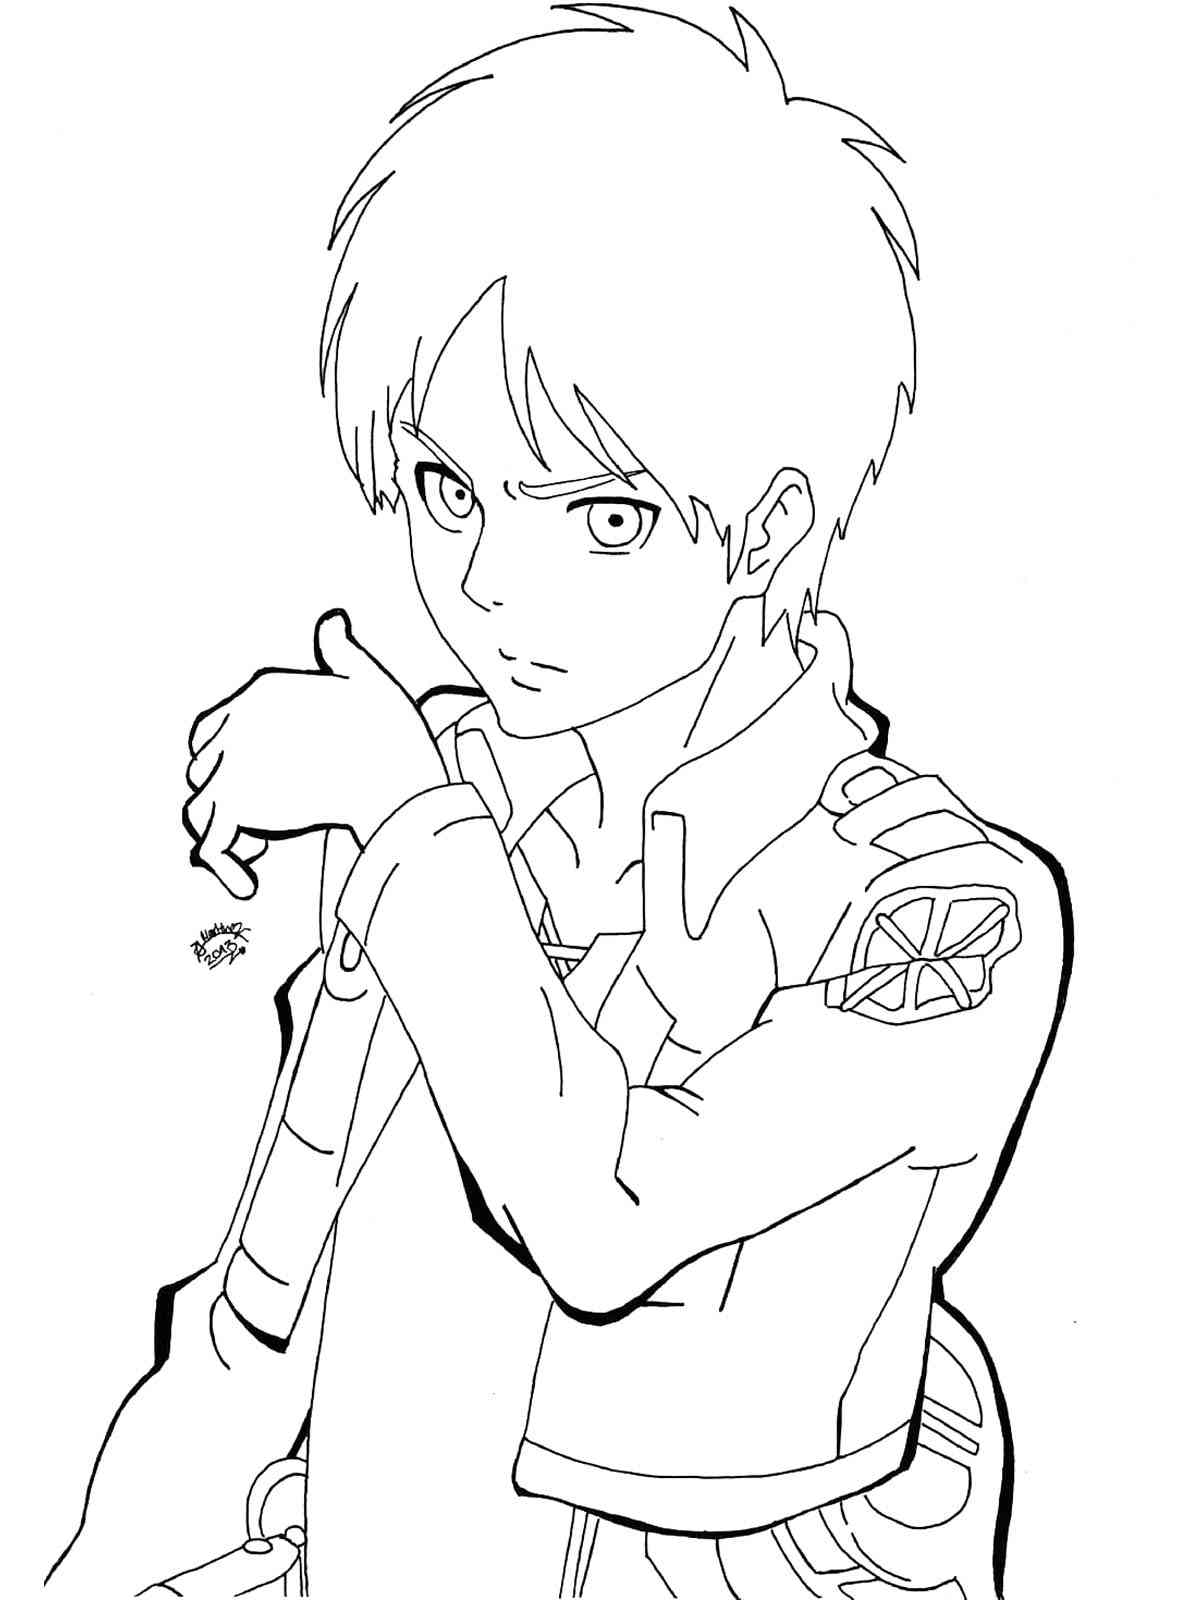 Eren Yeager coloring page